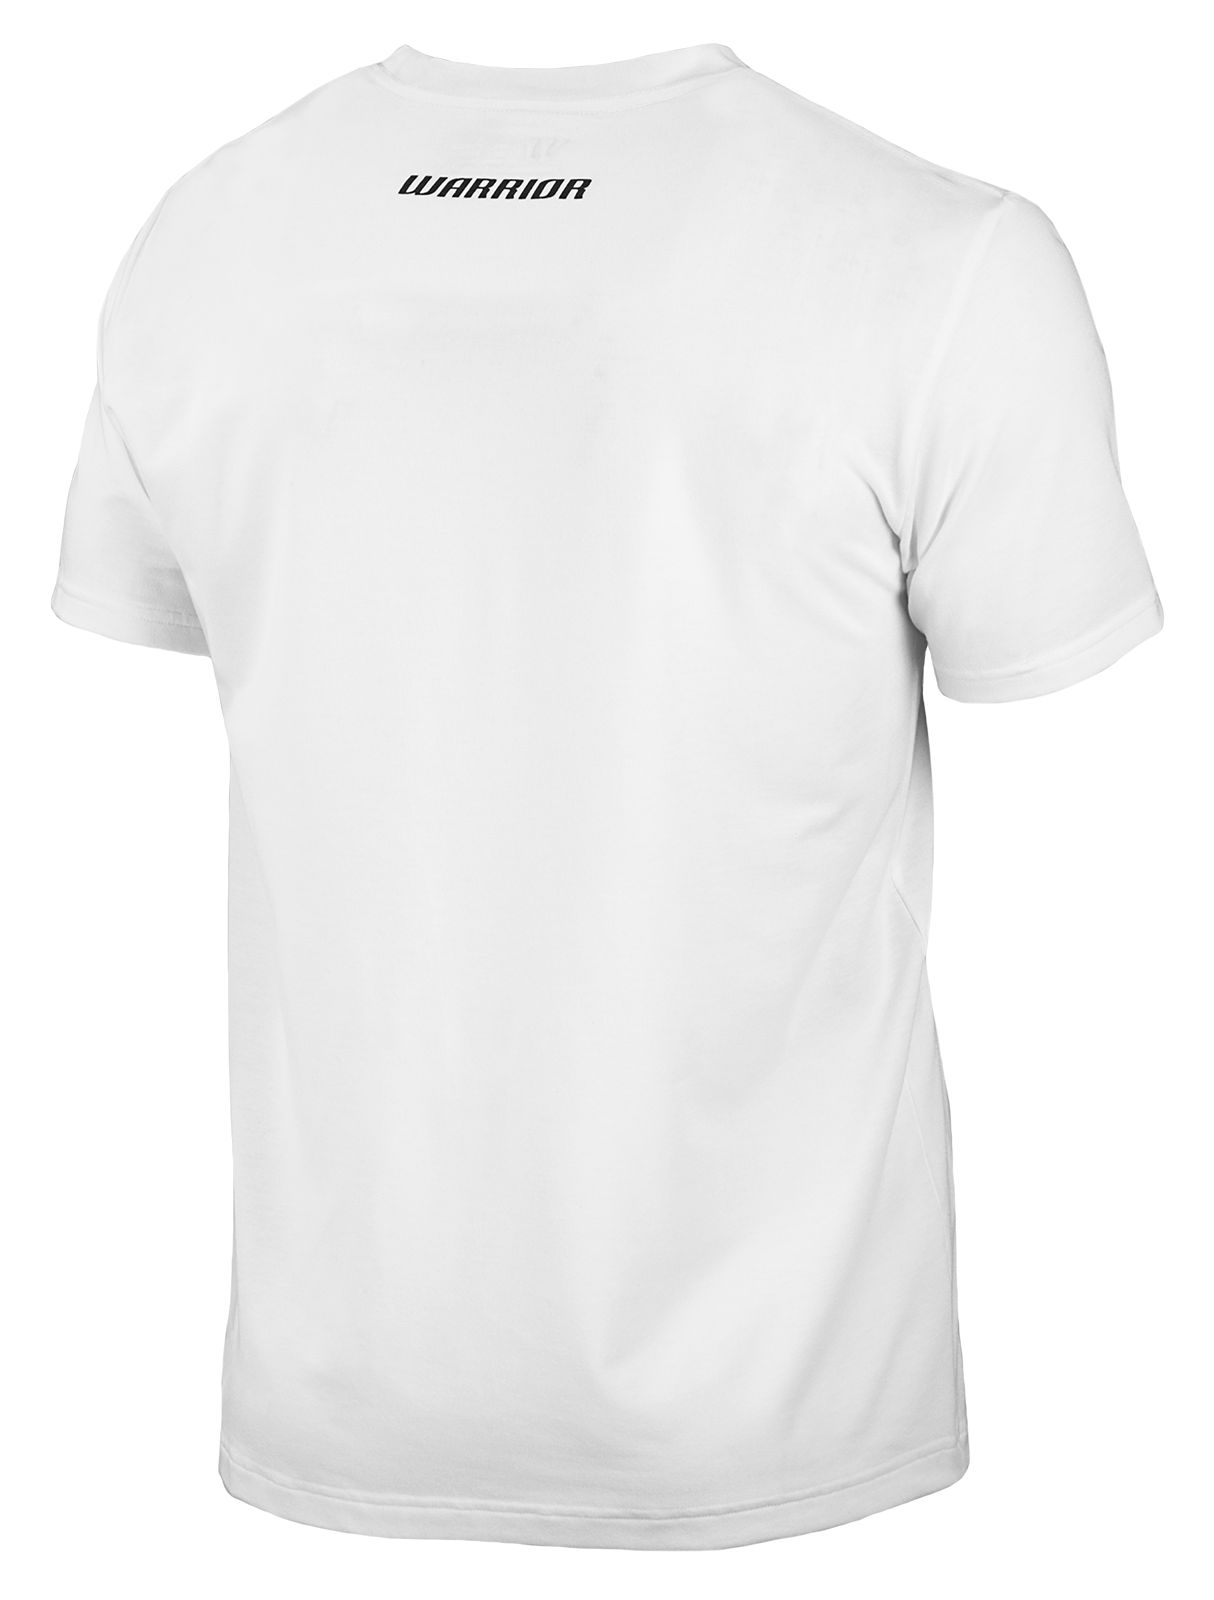 Reflective W Tech Tee, White image number 0